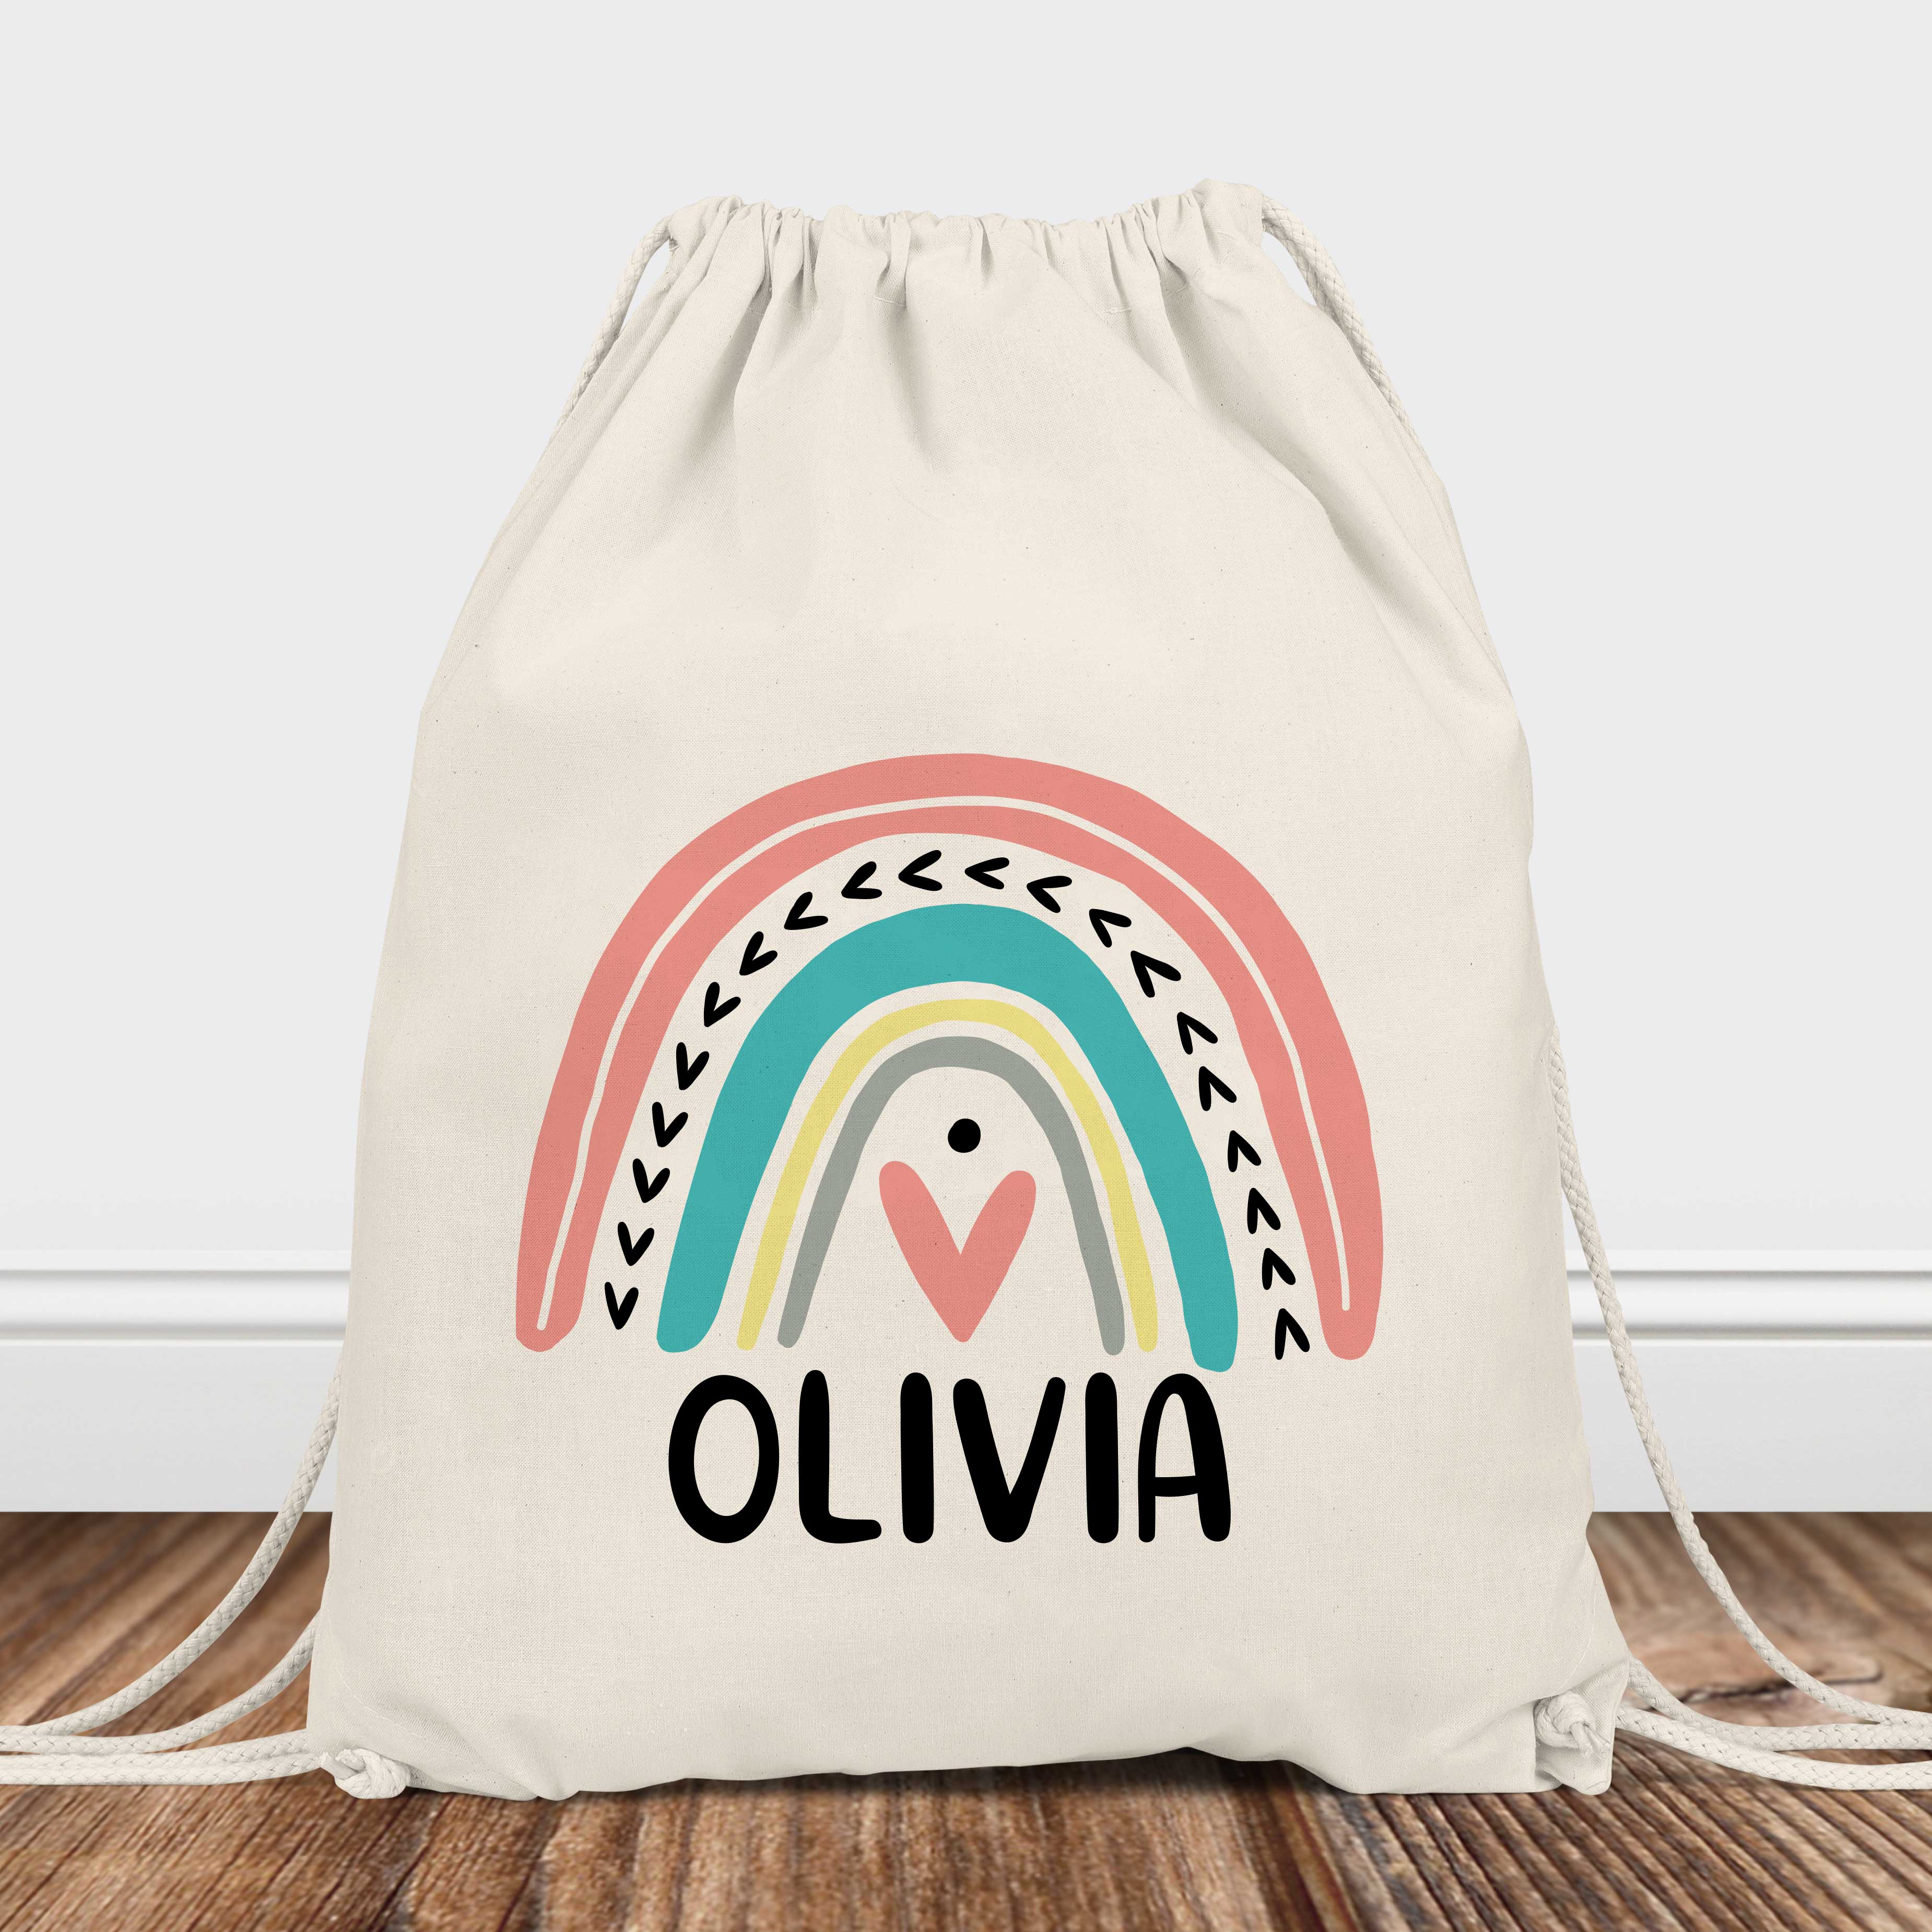 Rainbow Print Personalized Lunch Bag